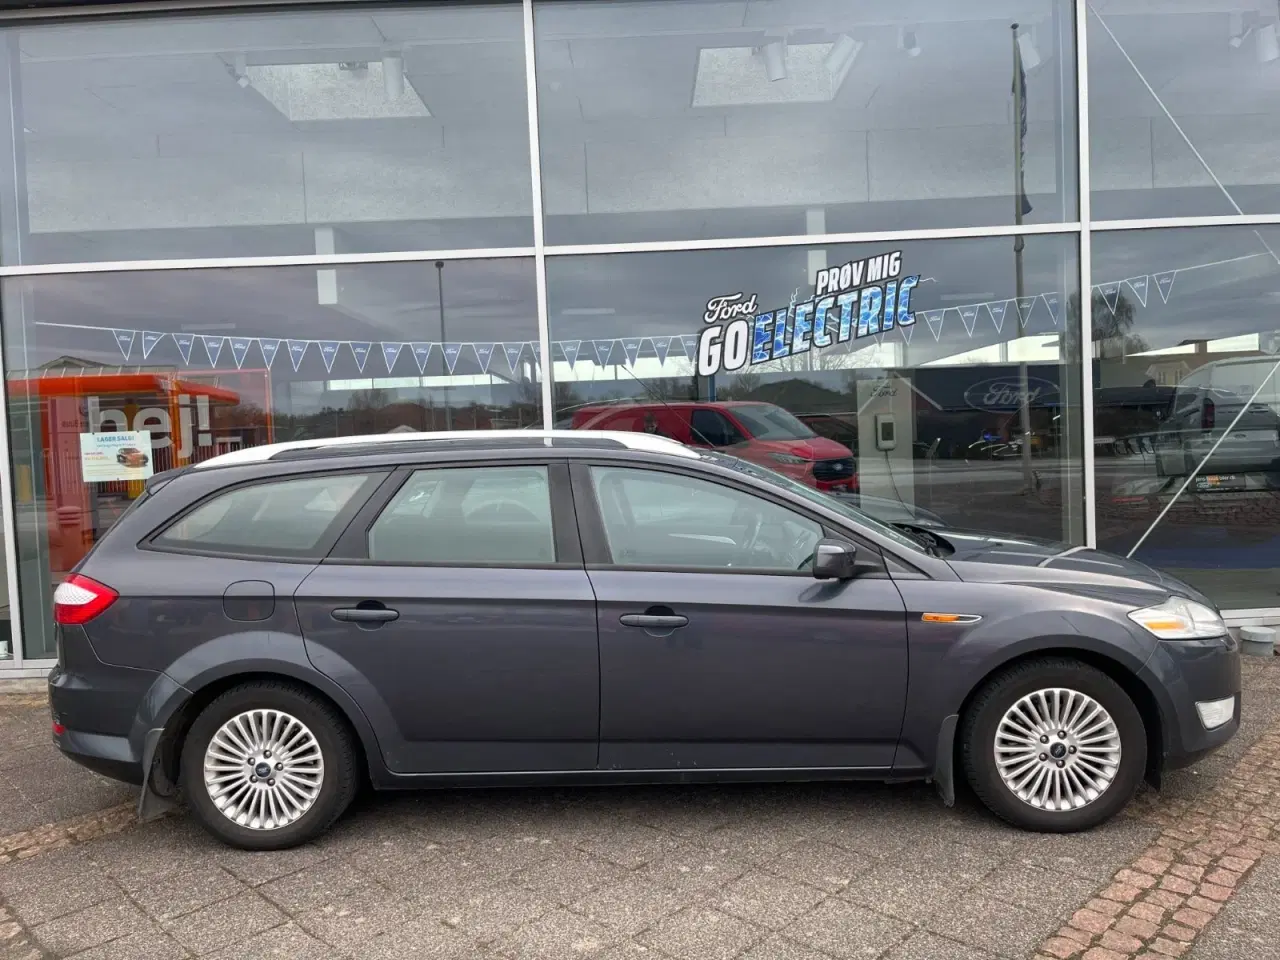 Billede 3 - Ford Mondeo 2,0 TDCi 115 ECOnetic stc.